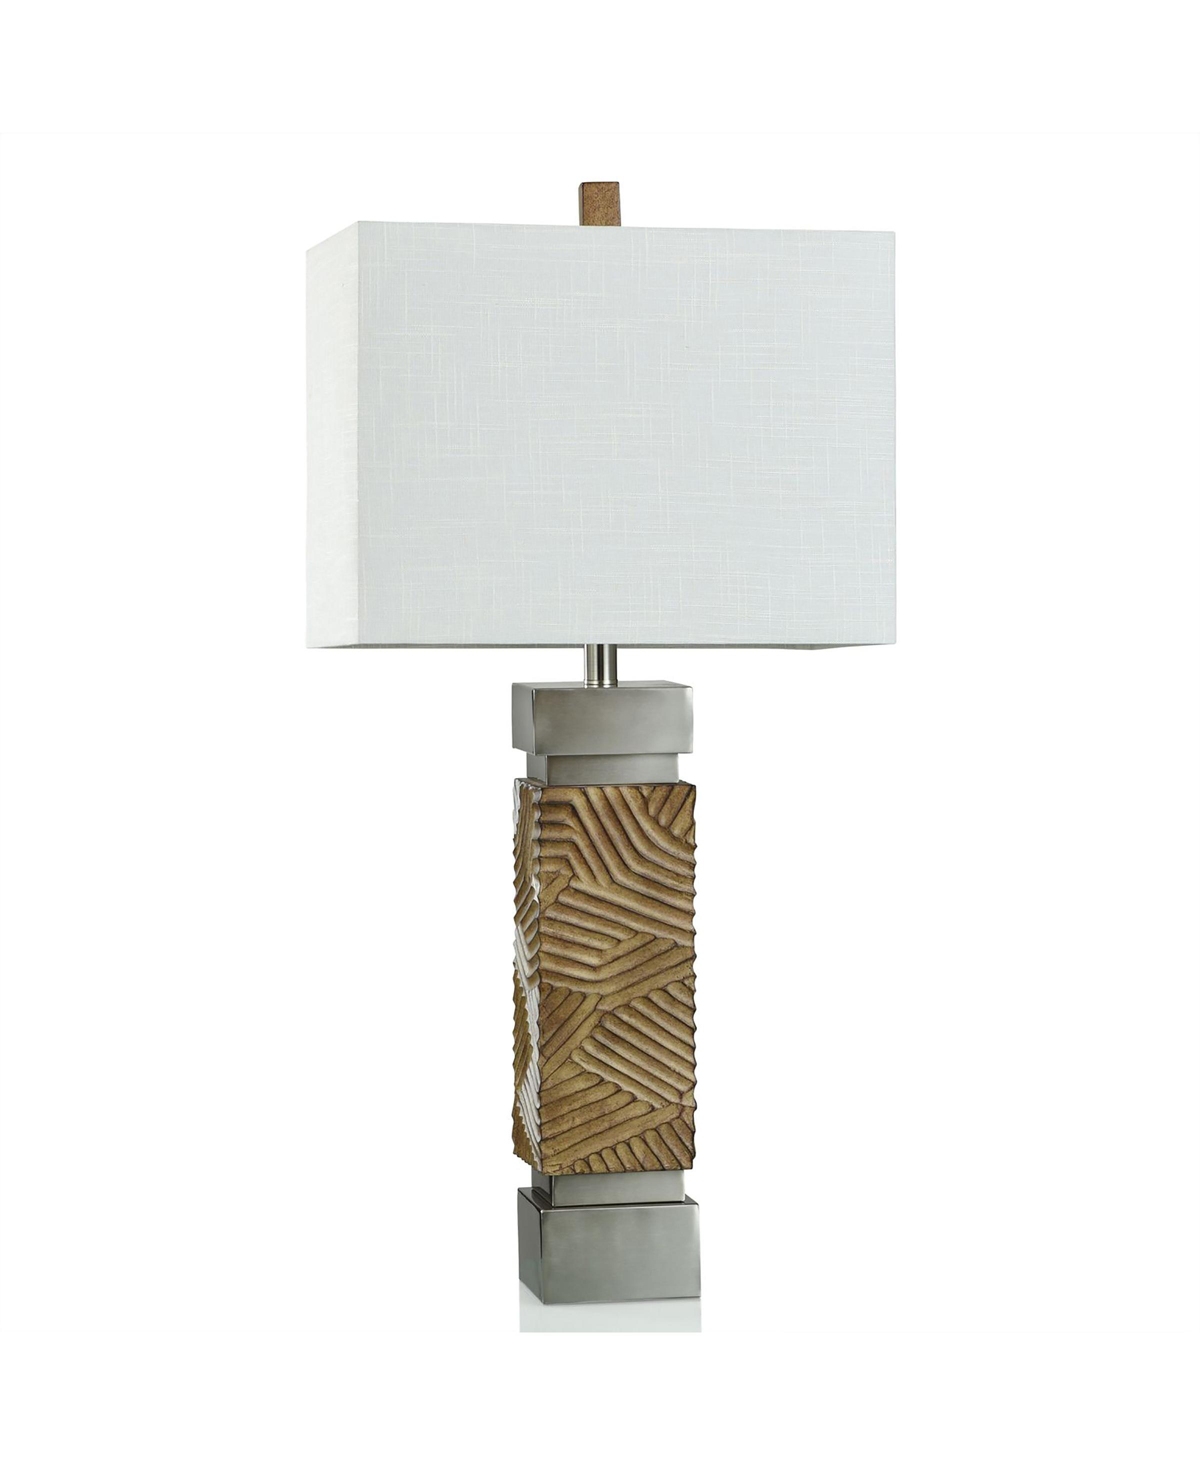 Stylecraft Home Collection 32.75" Bonafide Abstract Line Base With Silver Accents Table Lamp In Brushed Steel,brown Painted